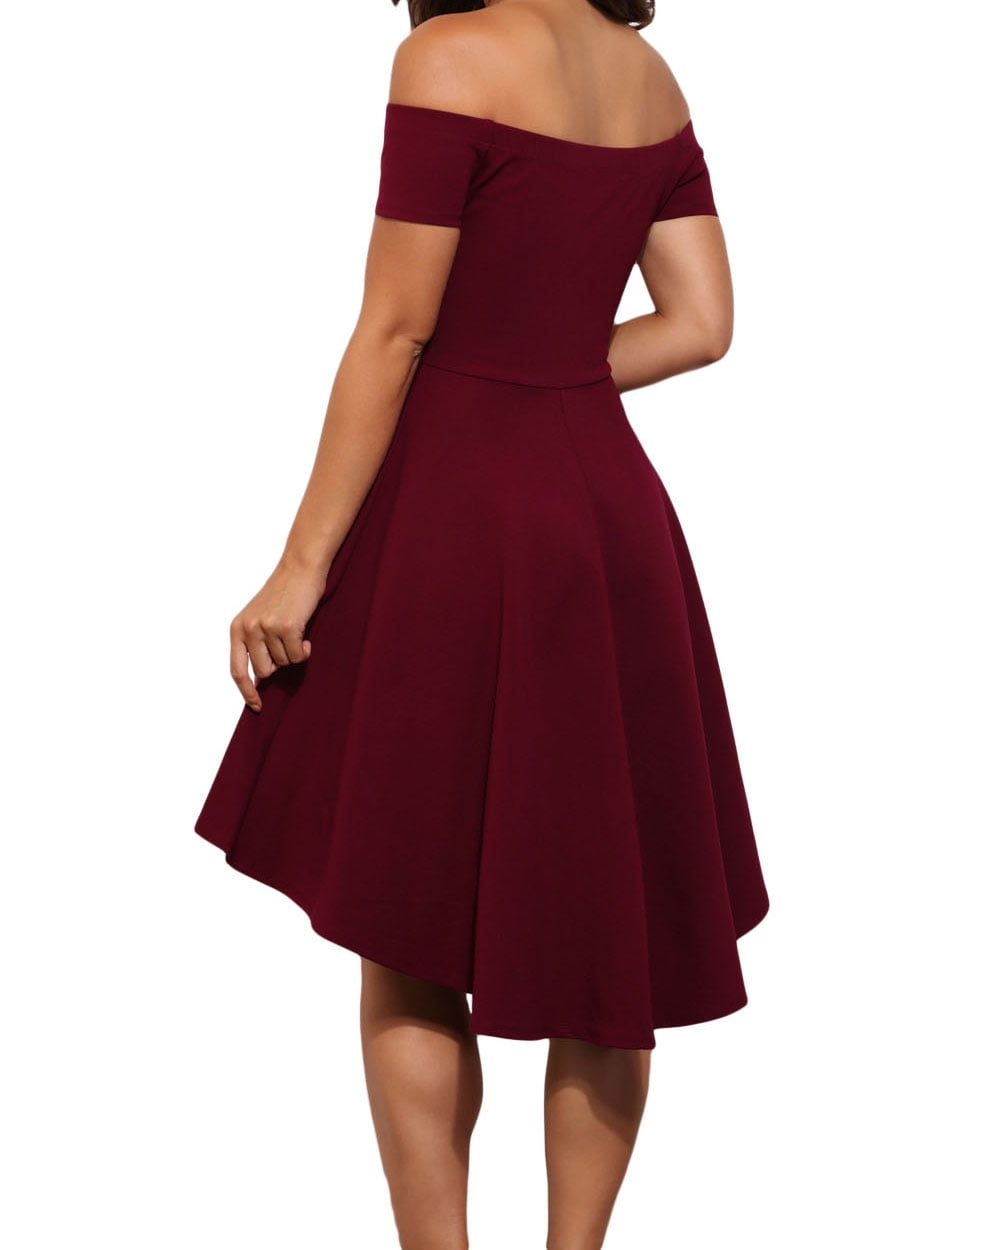 Robe patineuse bordeaux All The Rage ...